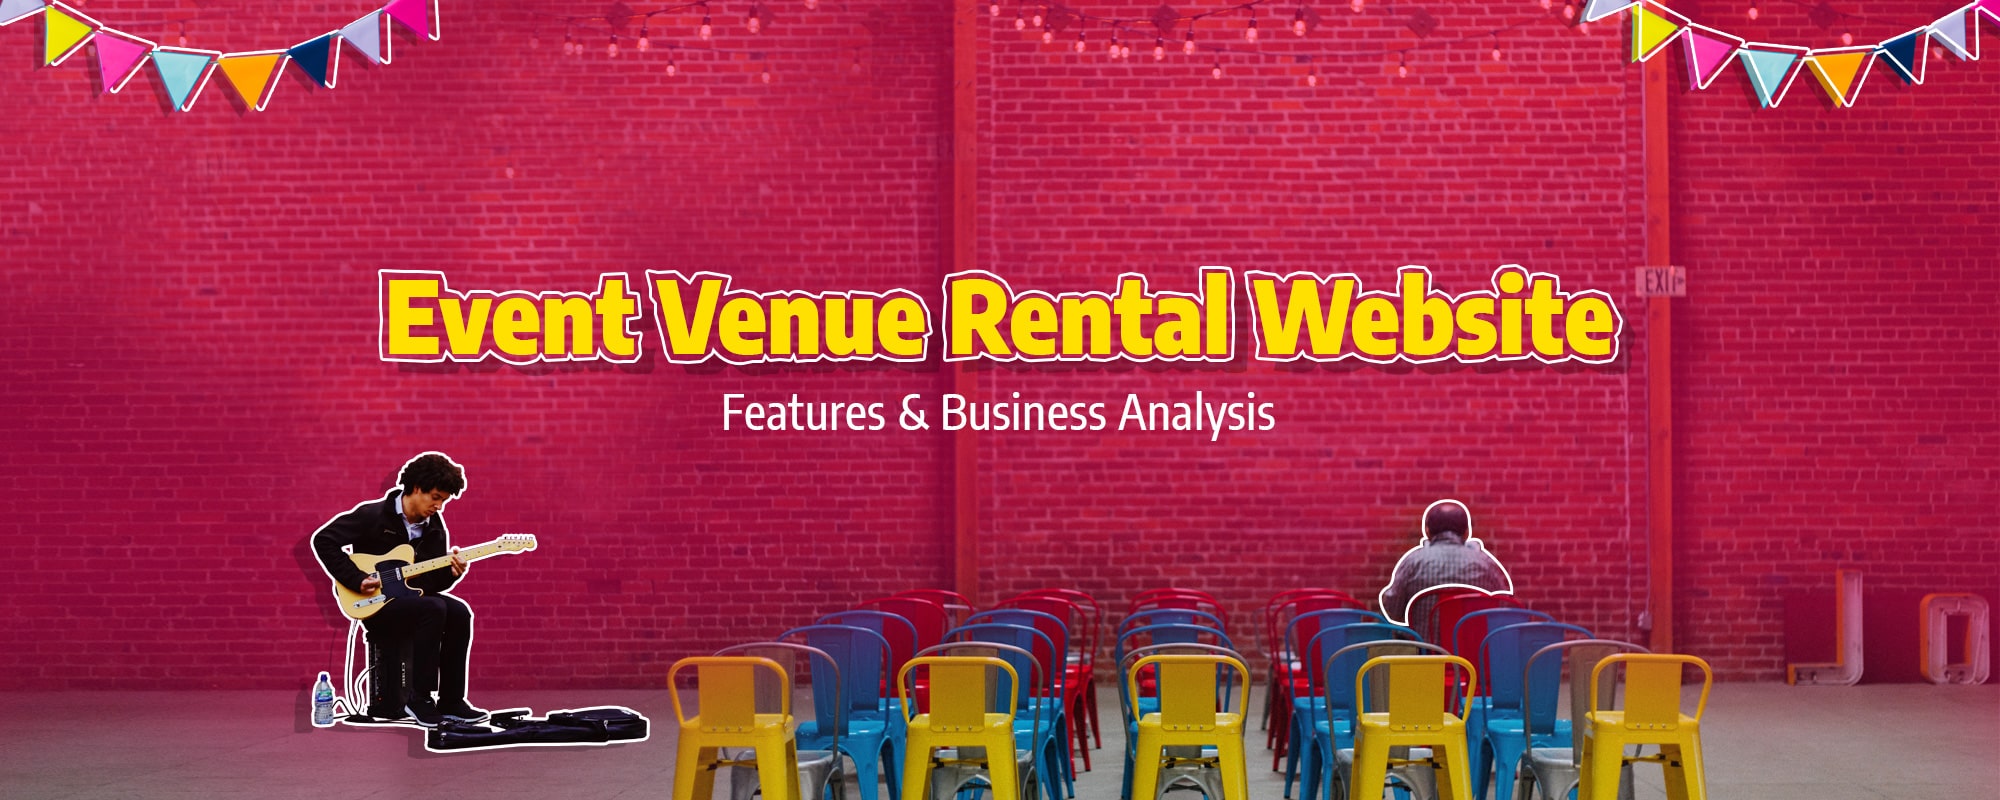 Events Venue Rental Website – Features and Business Model